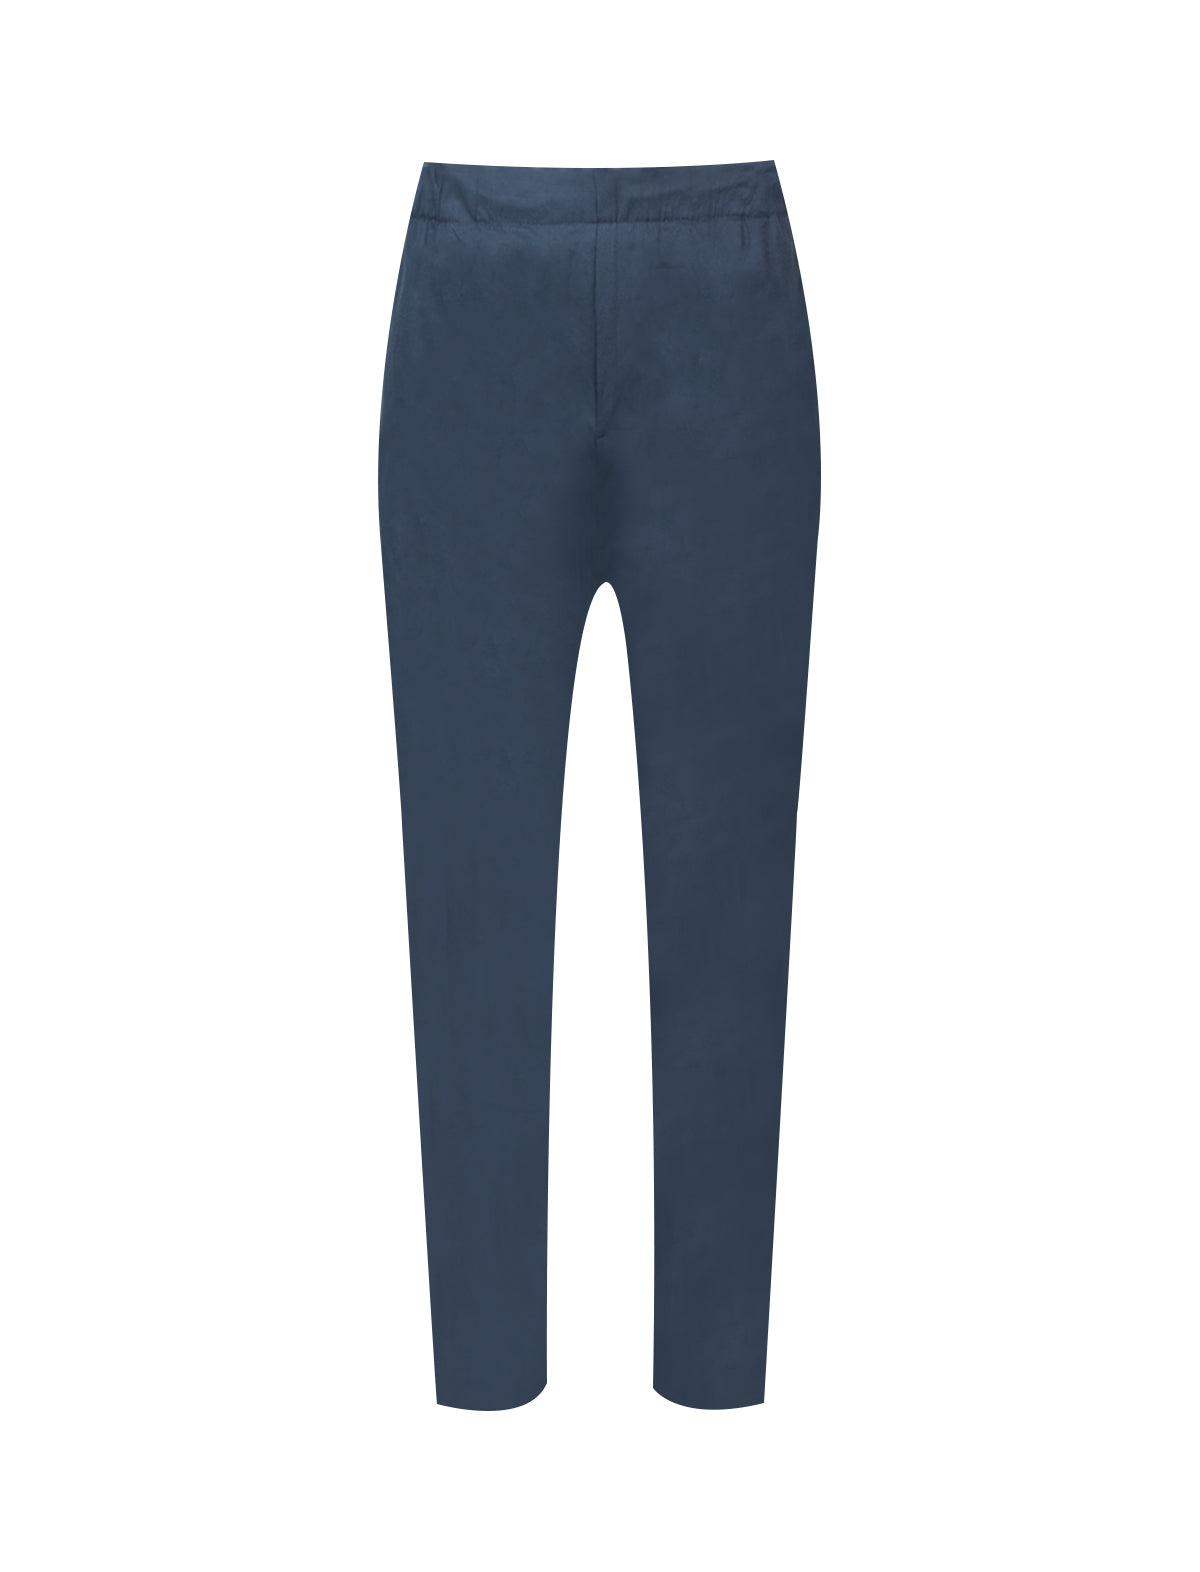 CARUSO Cotton Blend Drawstring Pants in Navy